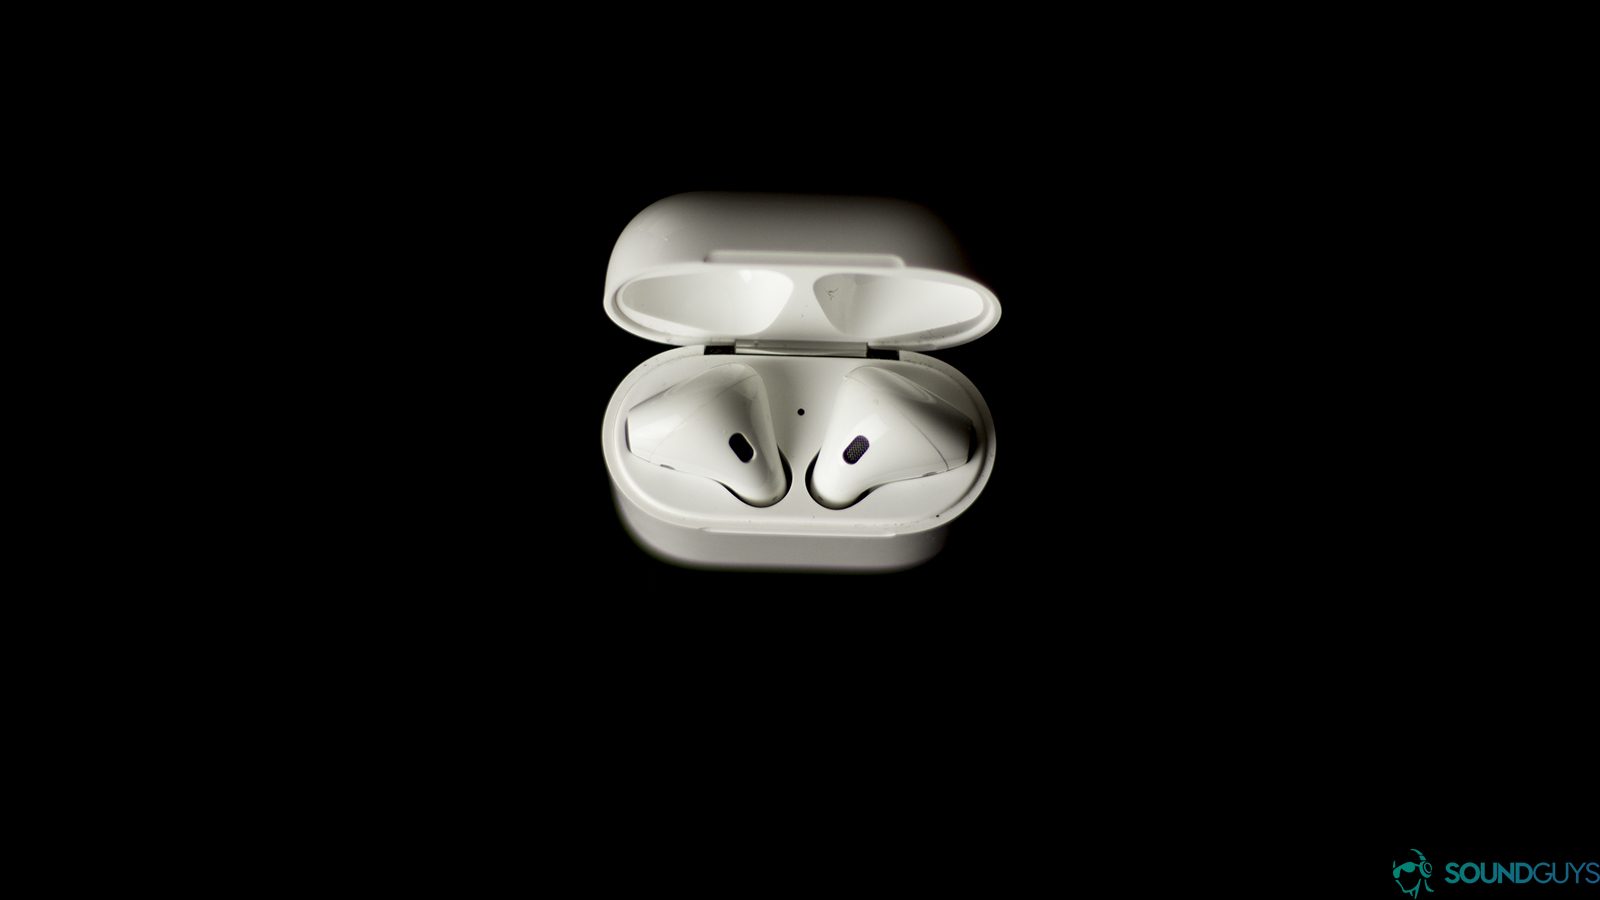 The Airpod charging case provides three hours of batter after just 15 minutes of charging. Pictured: A minimalist image with an all black background and an overhead shot of the Apple Airpods placed in the open charging case.